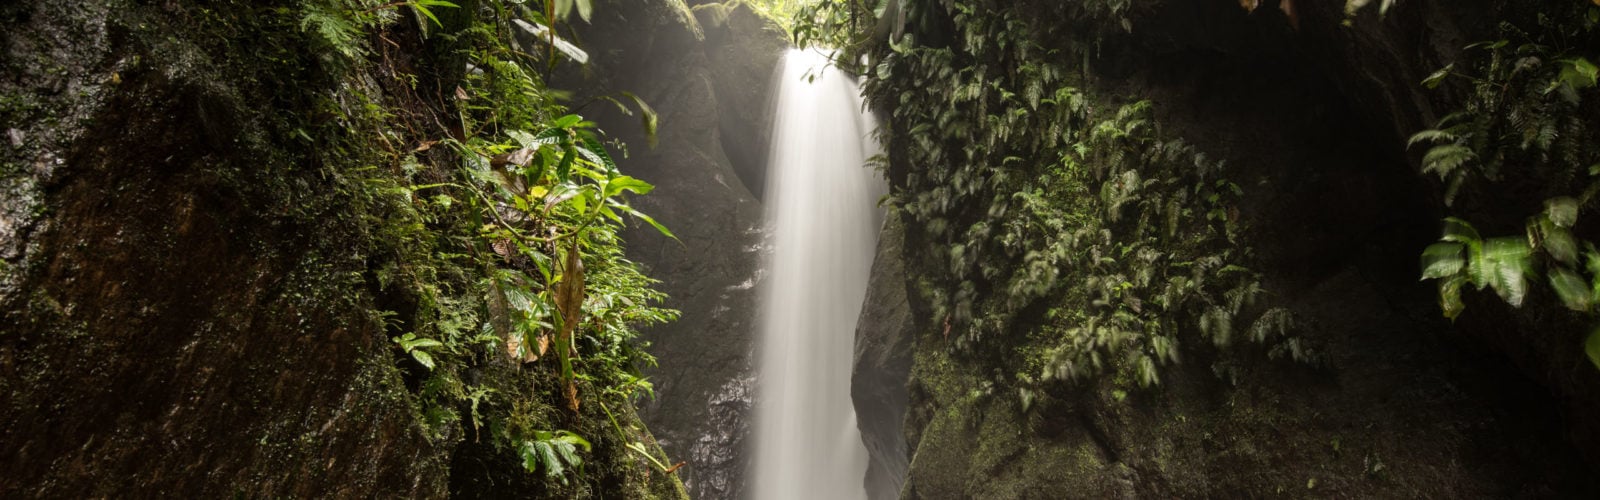 There are so many beautiful waterfalls in the rainforest of Ecuador, one more beautiful than the other